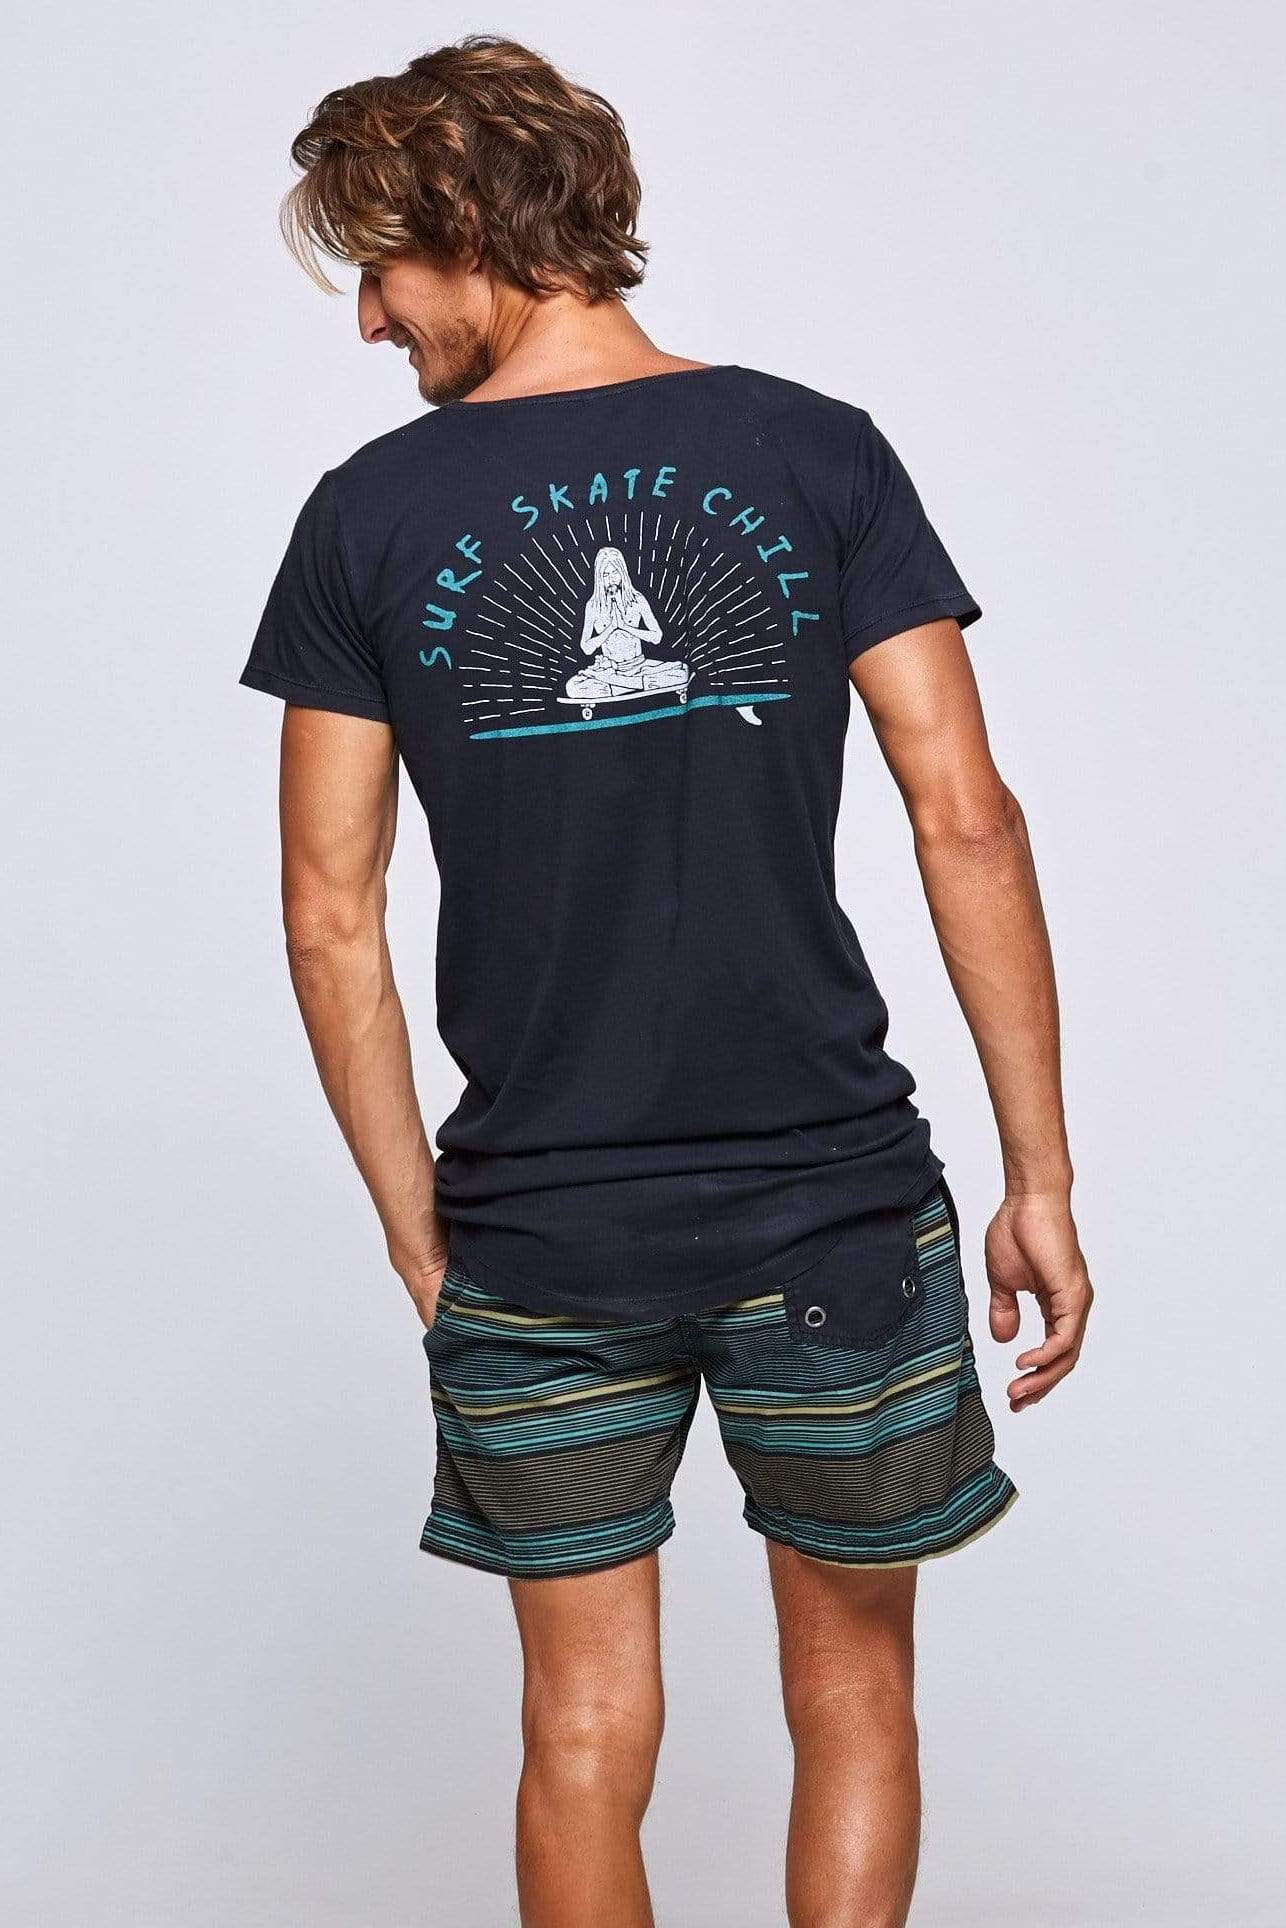 Ts Surf Skate Chill - Man T-Shirt - LOST IN PARADISE